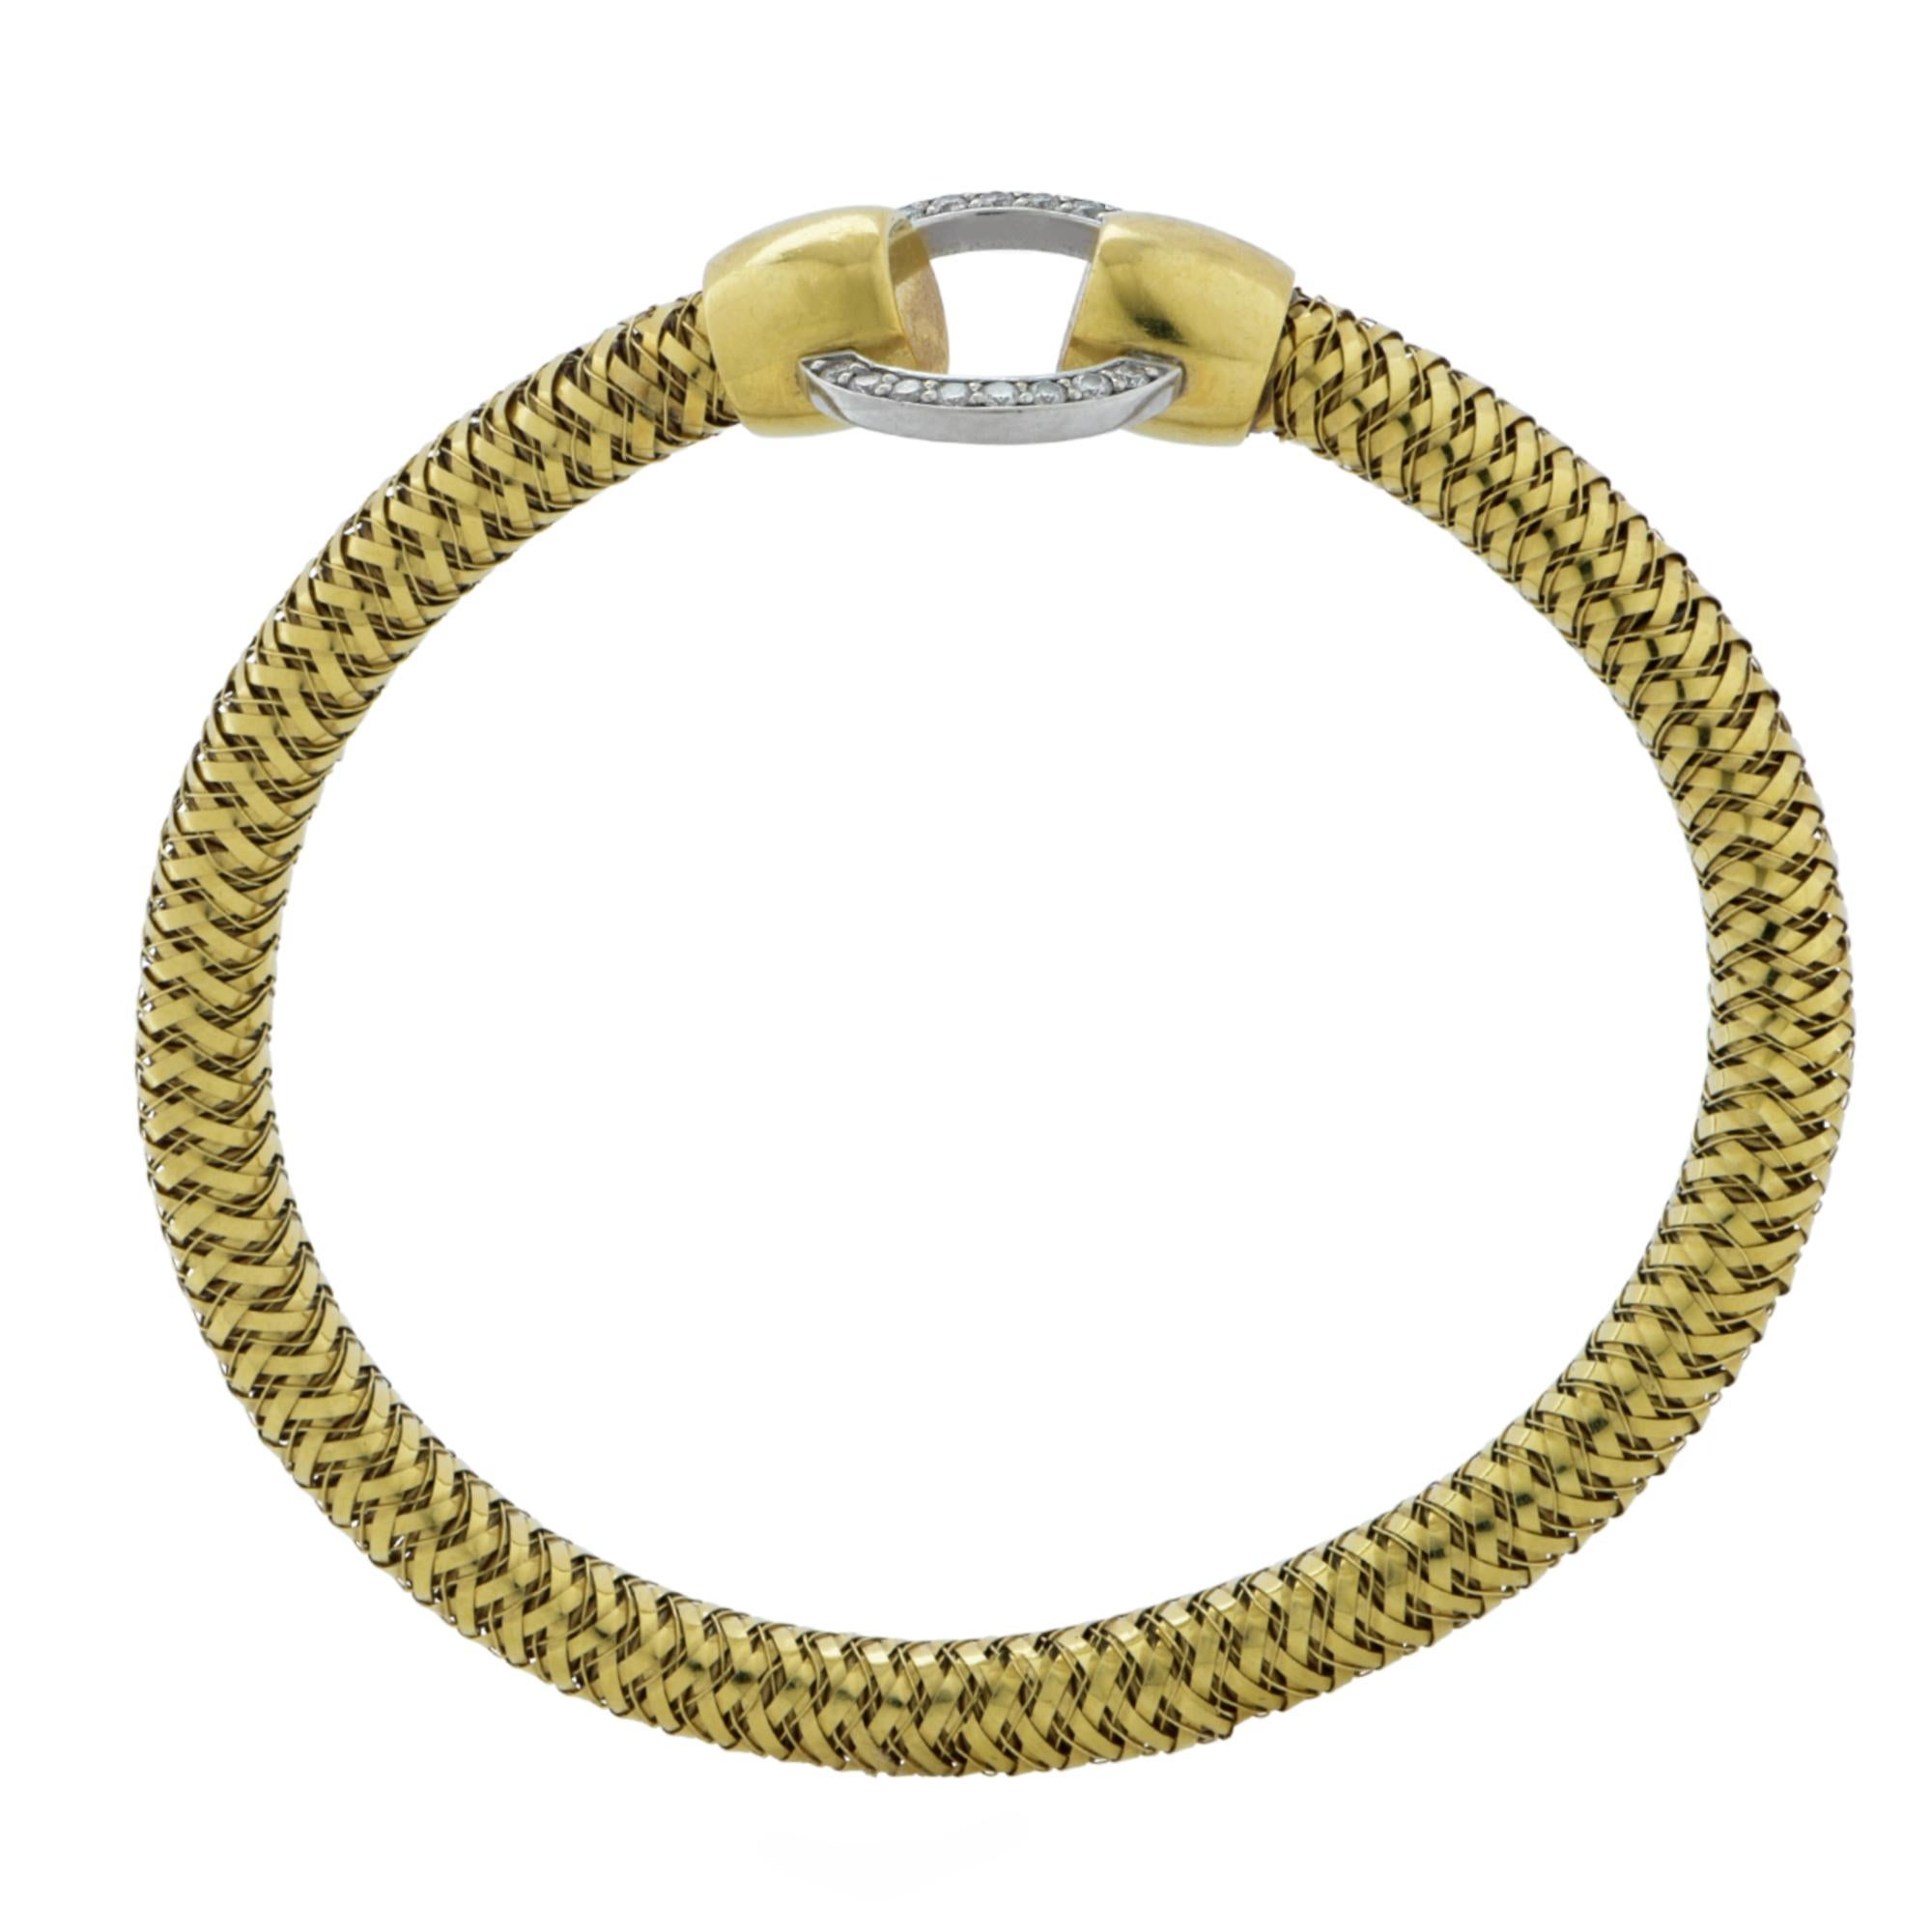 This classic bracelet from the Roberto Coin Primavera Collection, is crafted in 18 karat yellow and white gold, and features a flexible yellow gold chain, detailed with a diamond encrusted ring crafted in white gold, adorned with 16 diamonds,